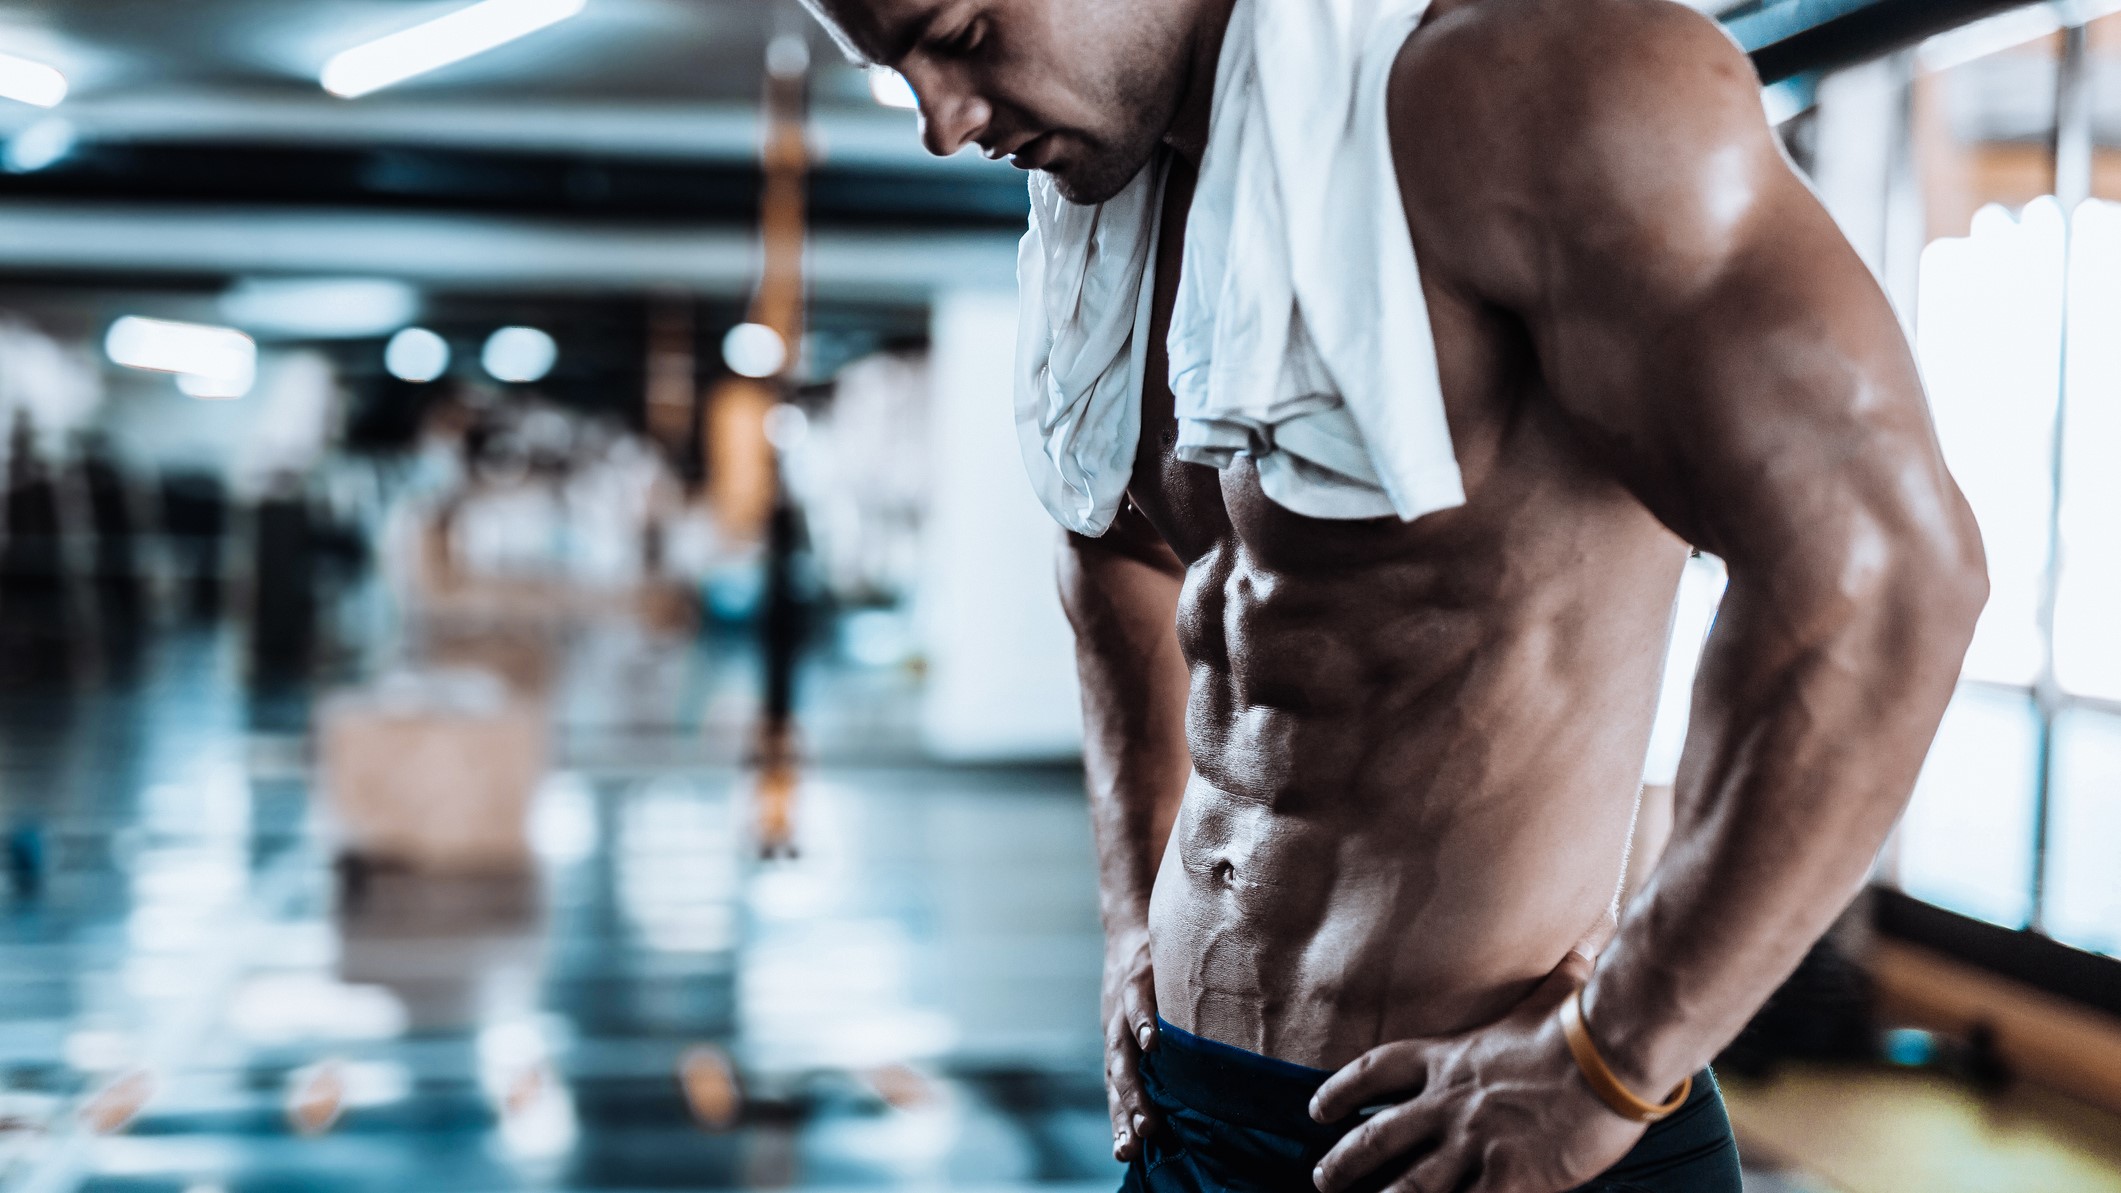 According to TikTok, this workout gives you abs — so I gave it a try